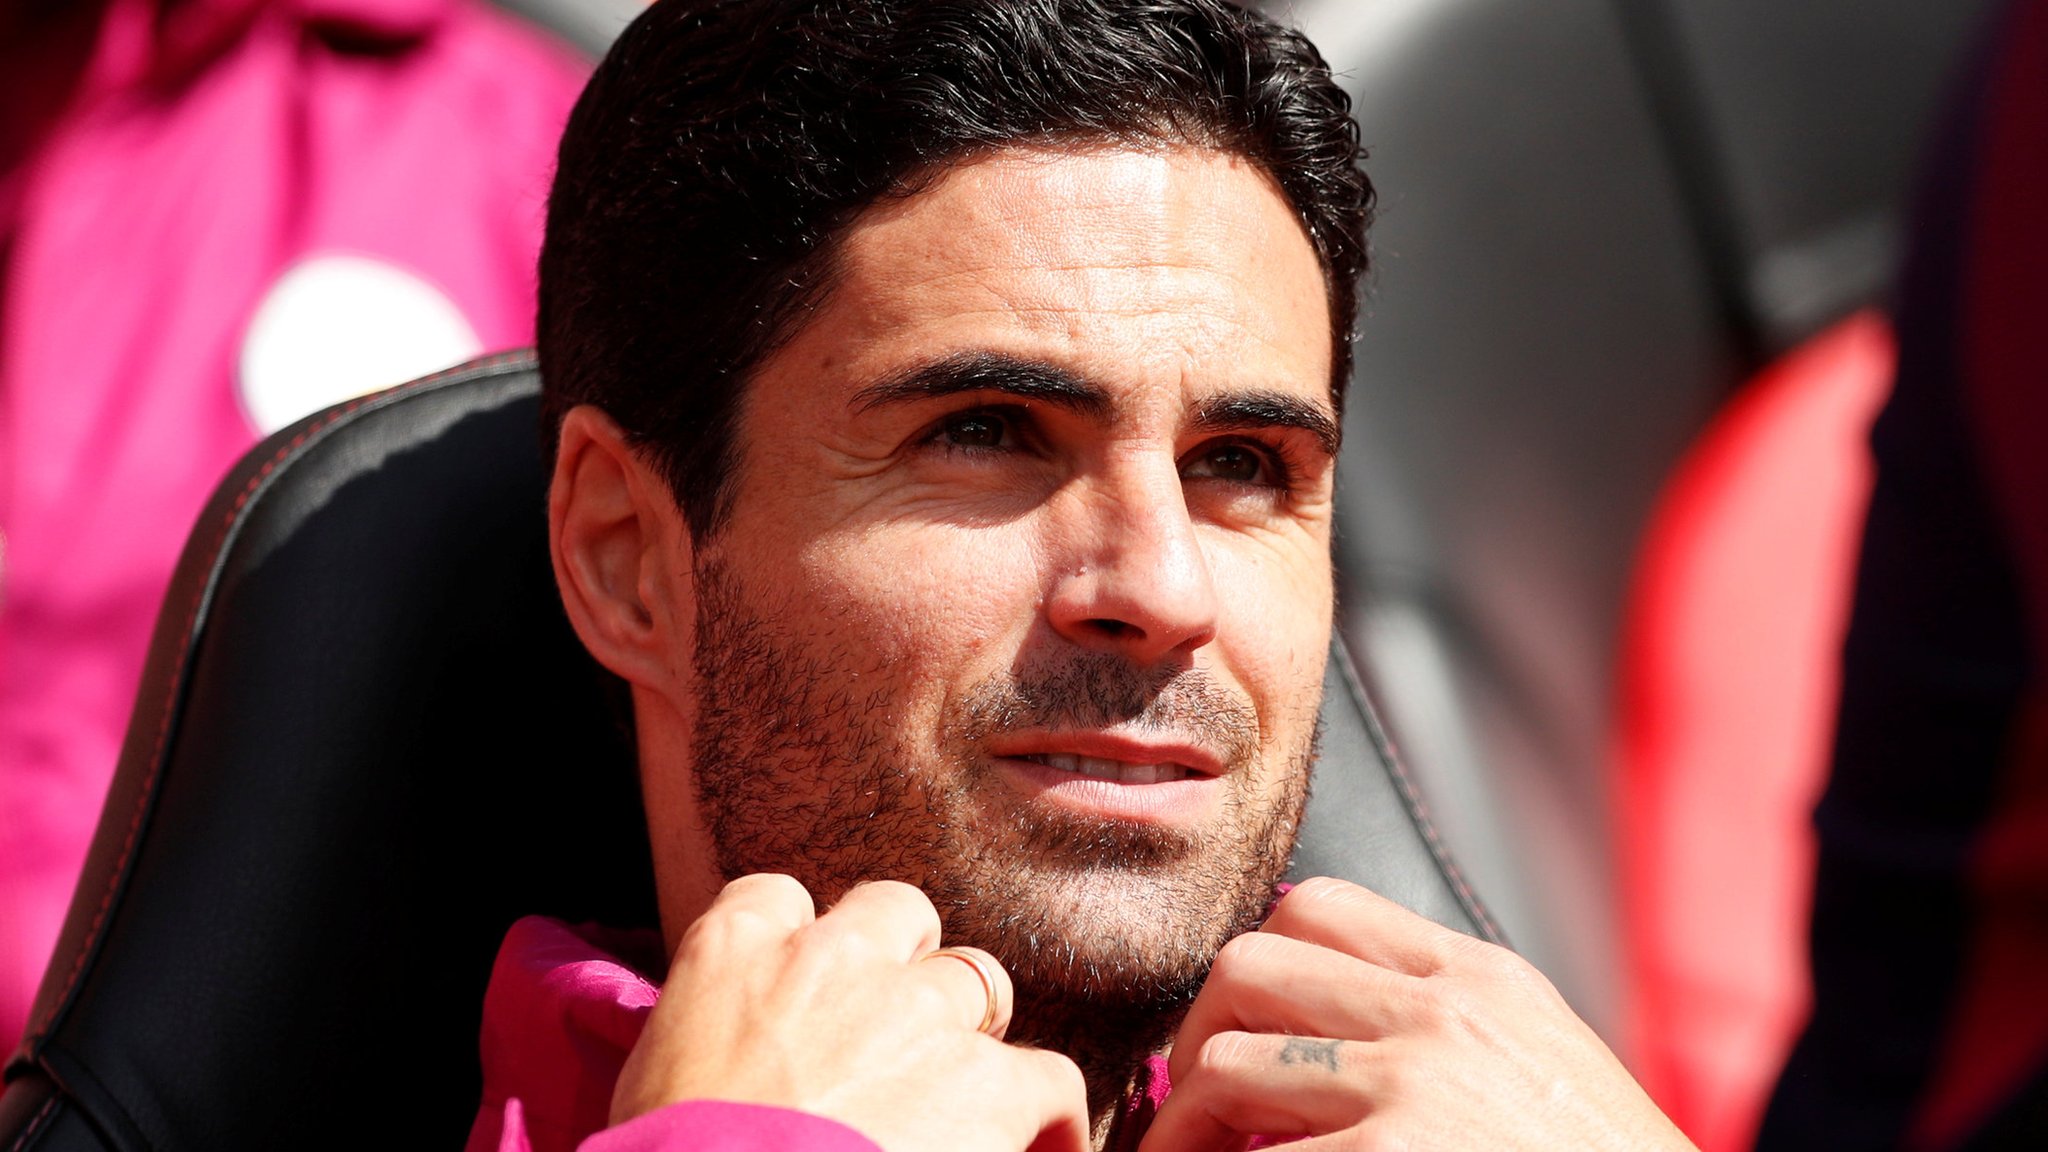 Arteta  has all the qualities" required to become Arsenal manager - Wenger